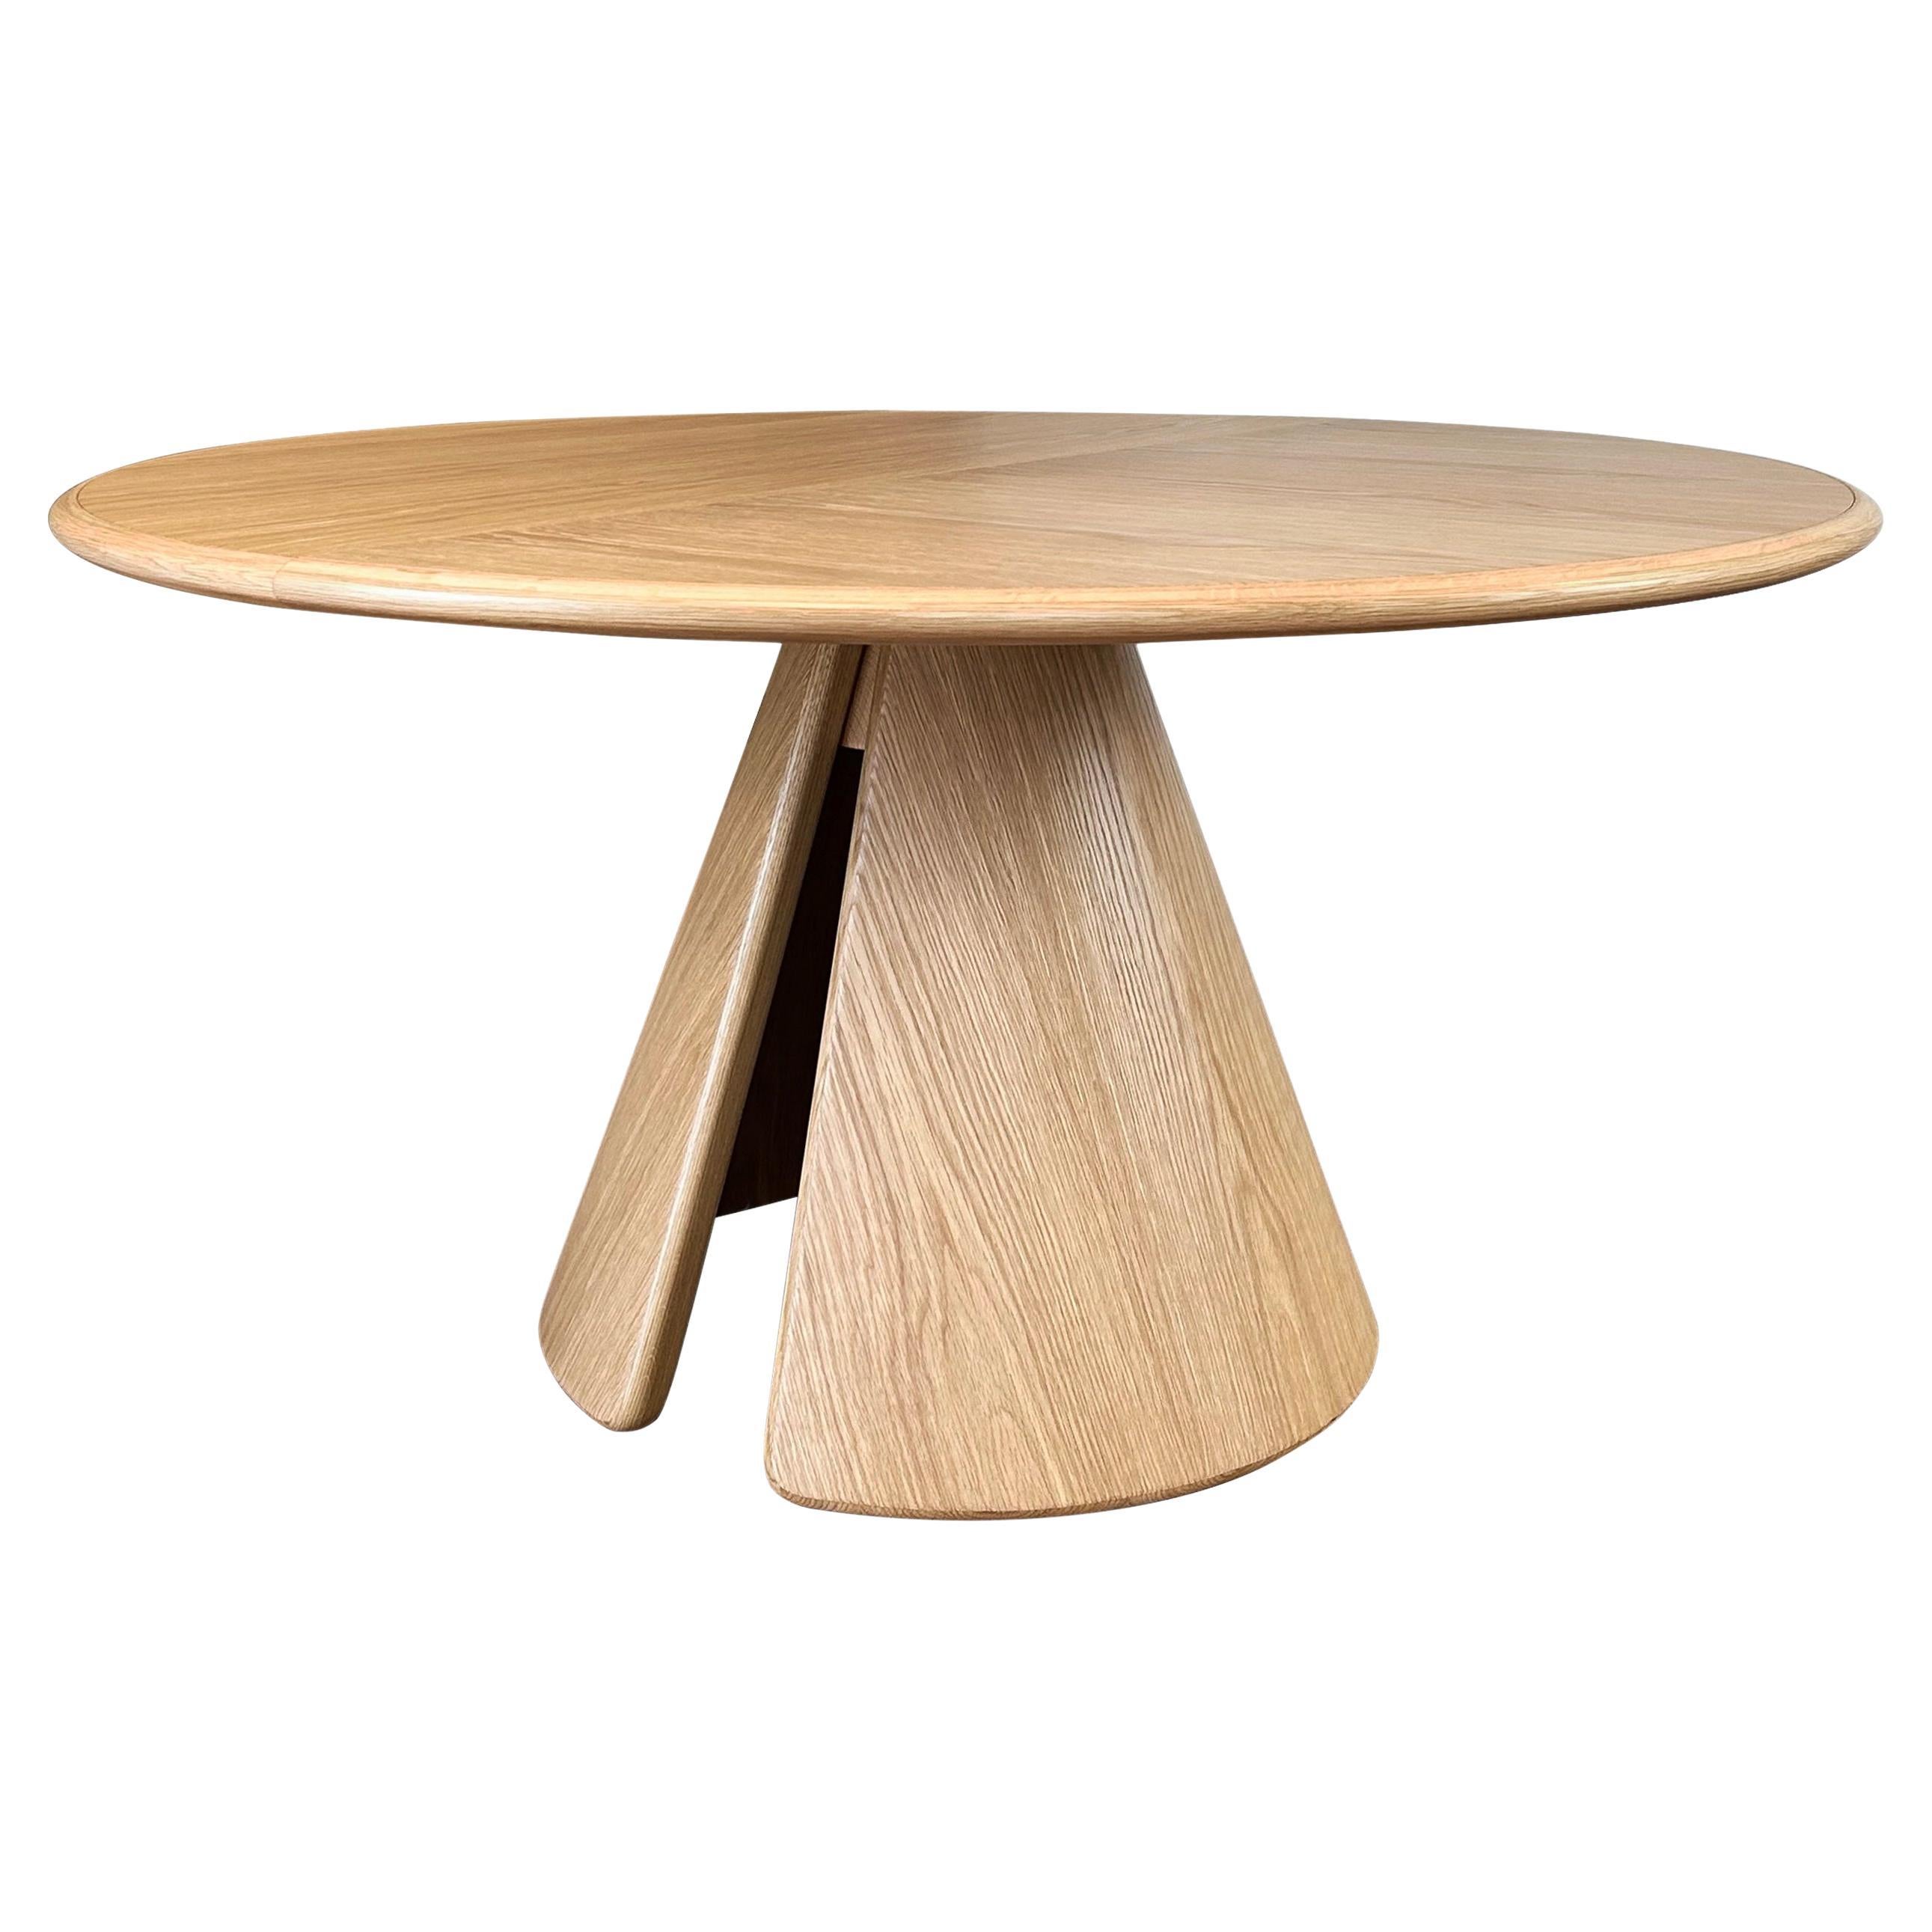 Sama Dining Table, Contemporary Sculptural Round Oak by Fulden Topaloglu